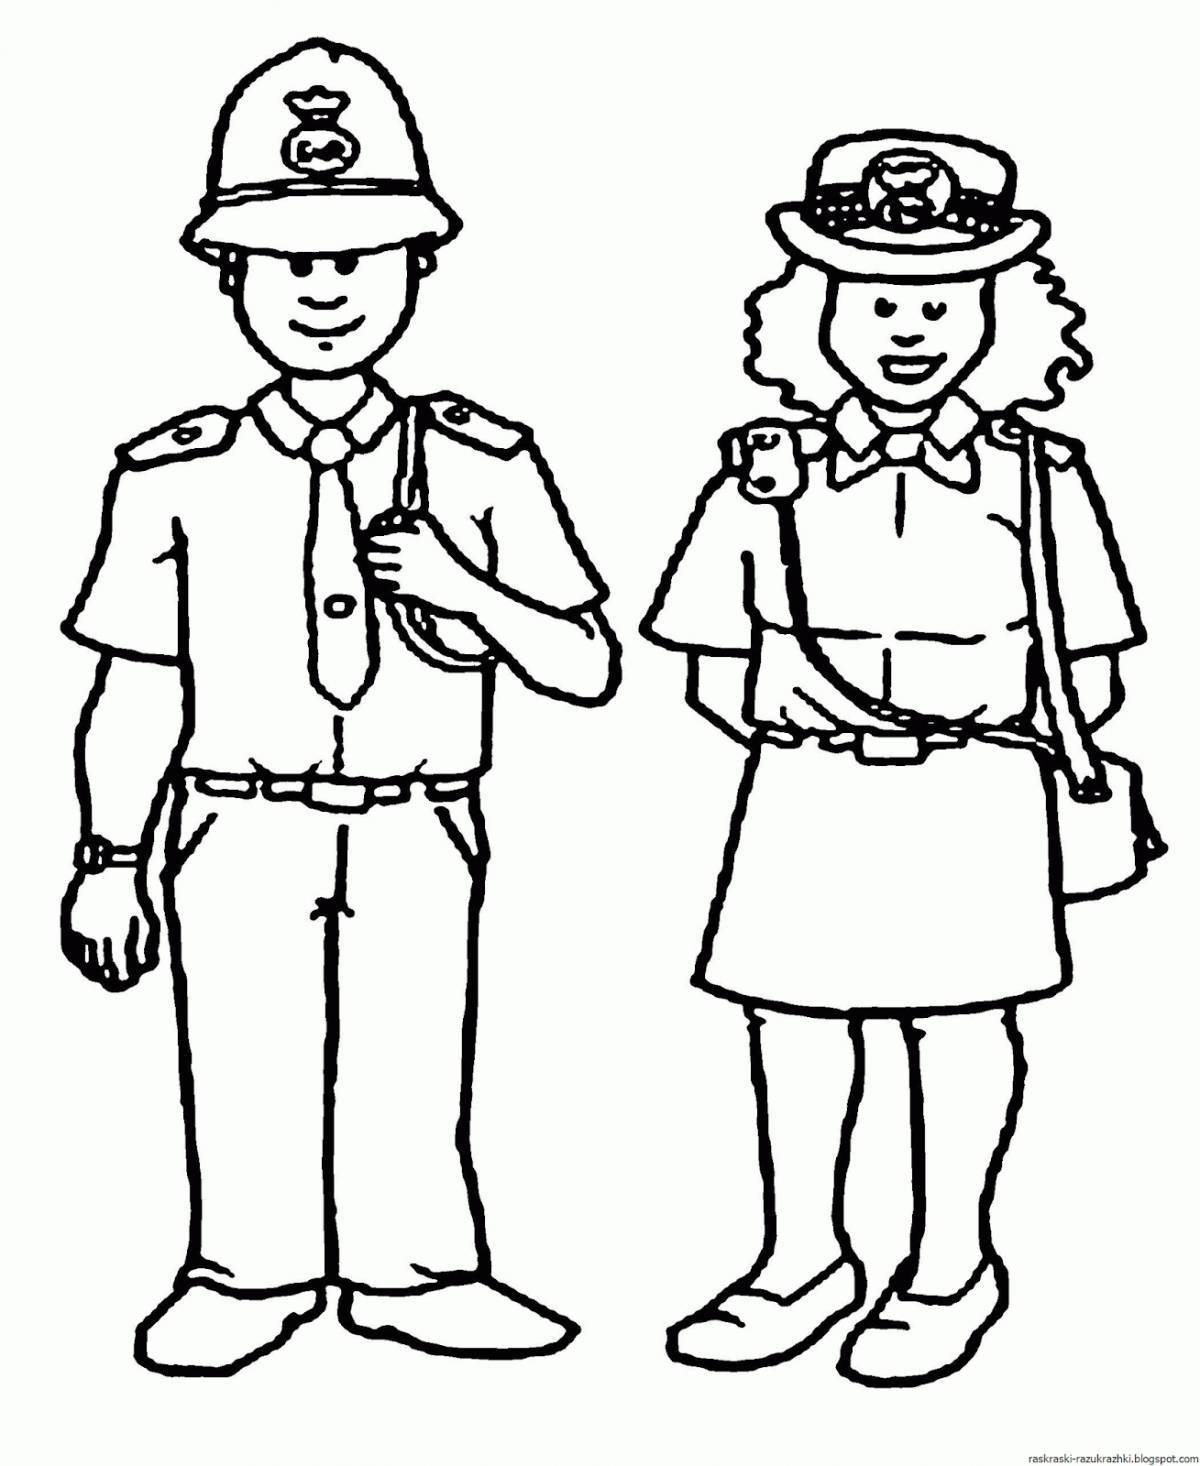 Glittering policeman coloring page